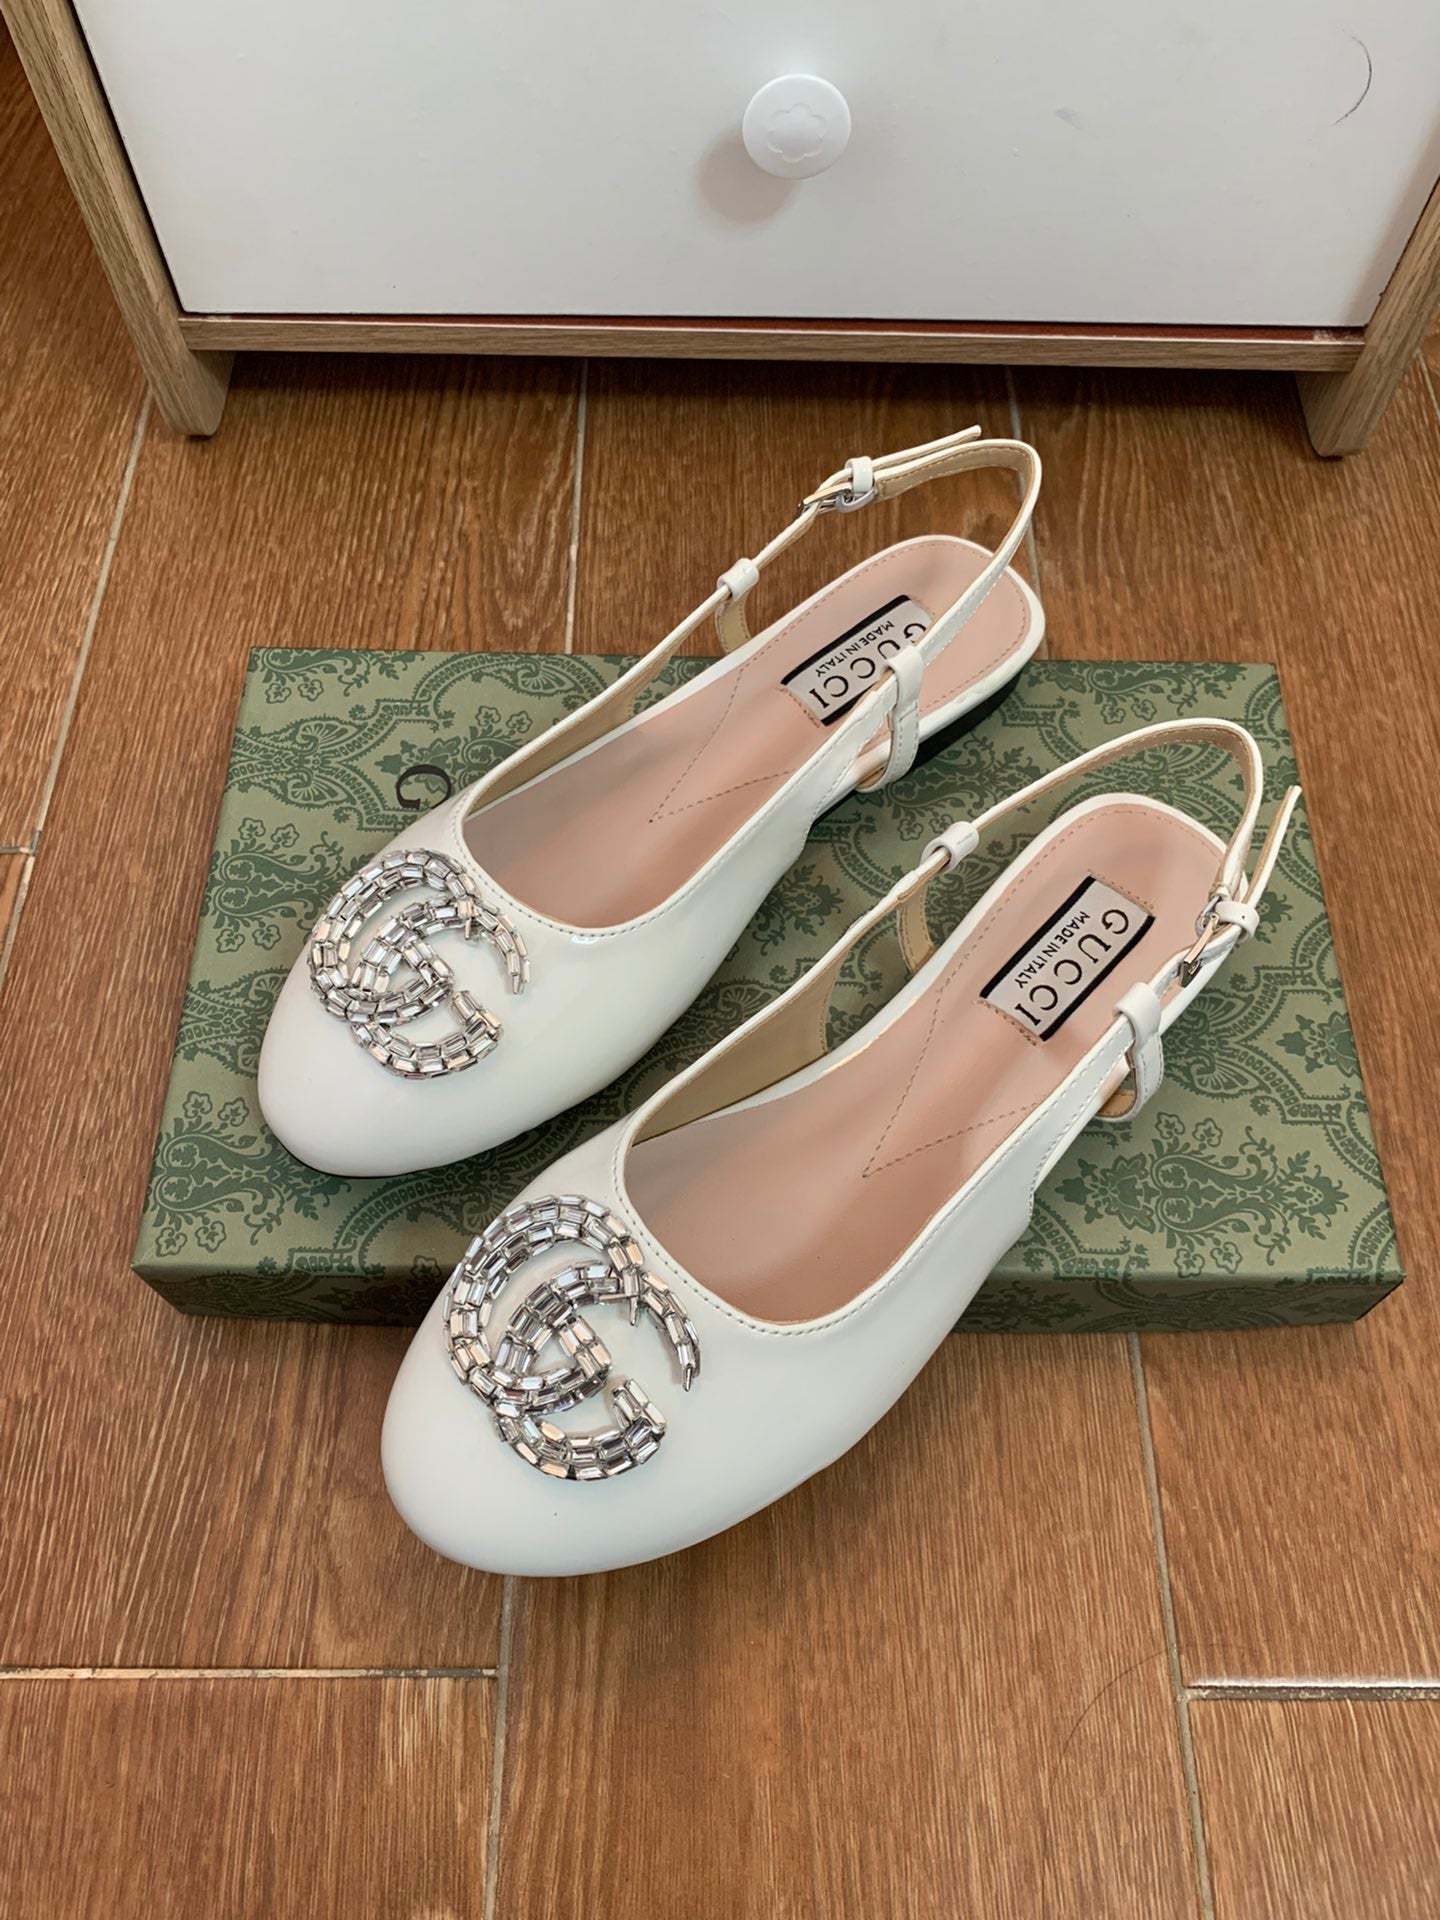 GG new arrival summer shoes 